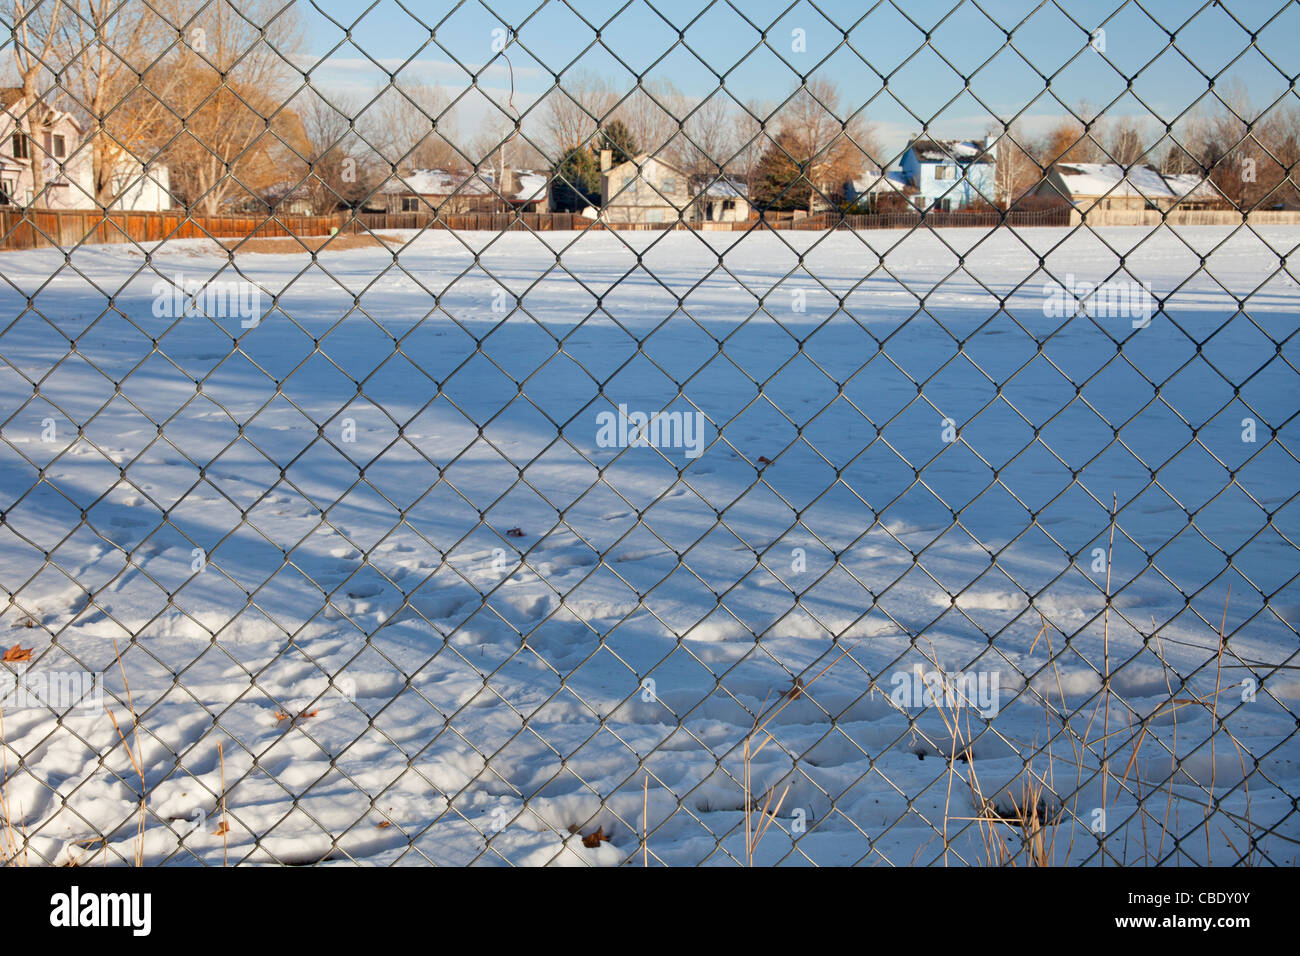 view through chain link fence on a typical residential neighborhood in Fort Collins, Colorado; winter scenery Stock Photo